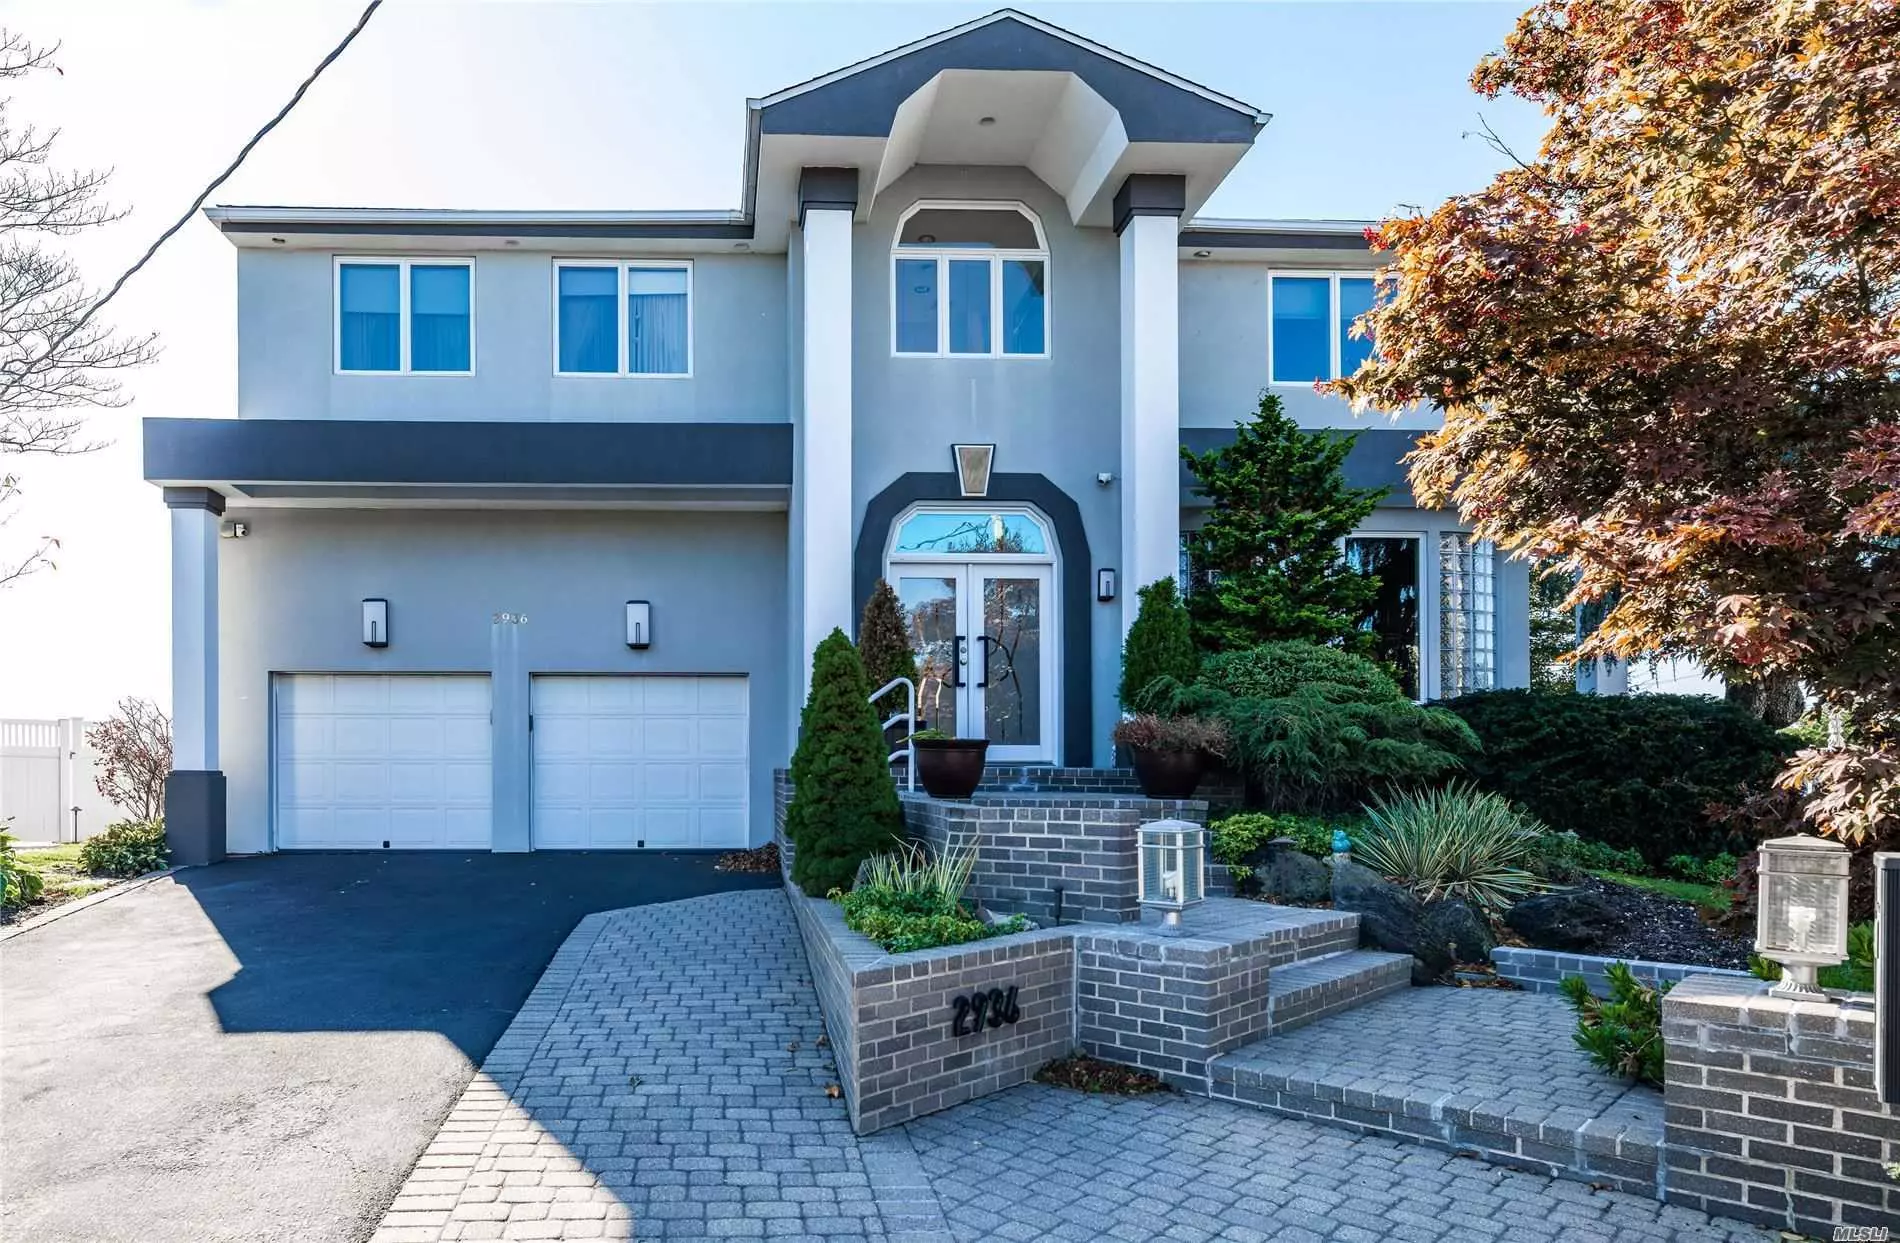 Open Bay &rsquo;Lindenmere&rsquo; Custom Colonial On 1/4 Acre Of Cul-De-Sac Property! Huge Full Finished Basement! Large Marble Eik W/Walls Of Glass Looking Out To The Bay! Approx.4 Yr.--185&rsquo; Of Vinyl Bulkheading!! High Elevation W/2Yr. New Granite Bbq W/Frig. 3 Brand New Compressrs, Andersens Thruout! Beautiful Layout W/Panoramic Views! All Information Deemed Reliable But Not Guaranteed. Waterfront Oasis W/ Floating Dock, Boat Lift, Jet Ski Dock, New Bulkhead, outdoor kitchen,